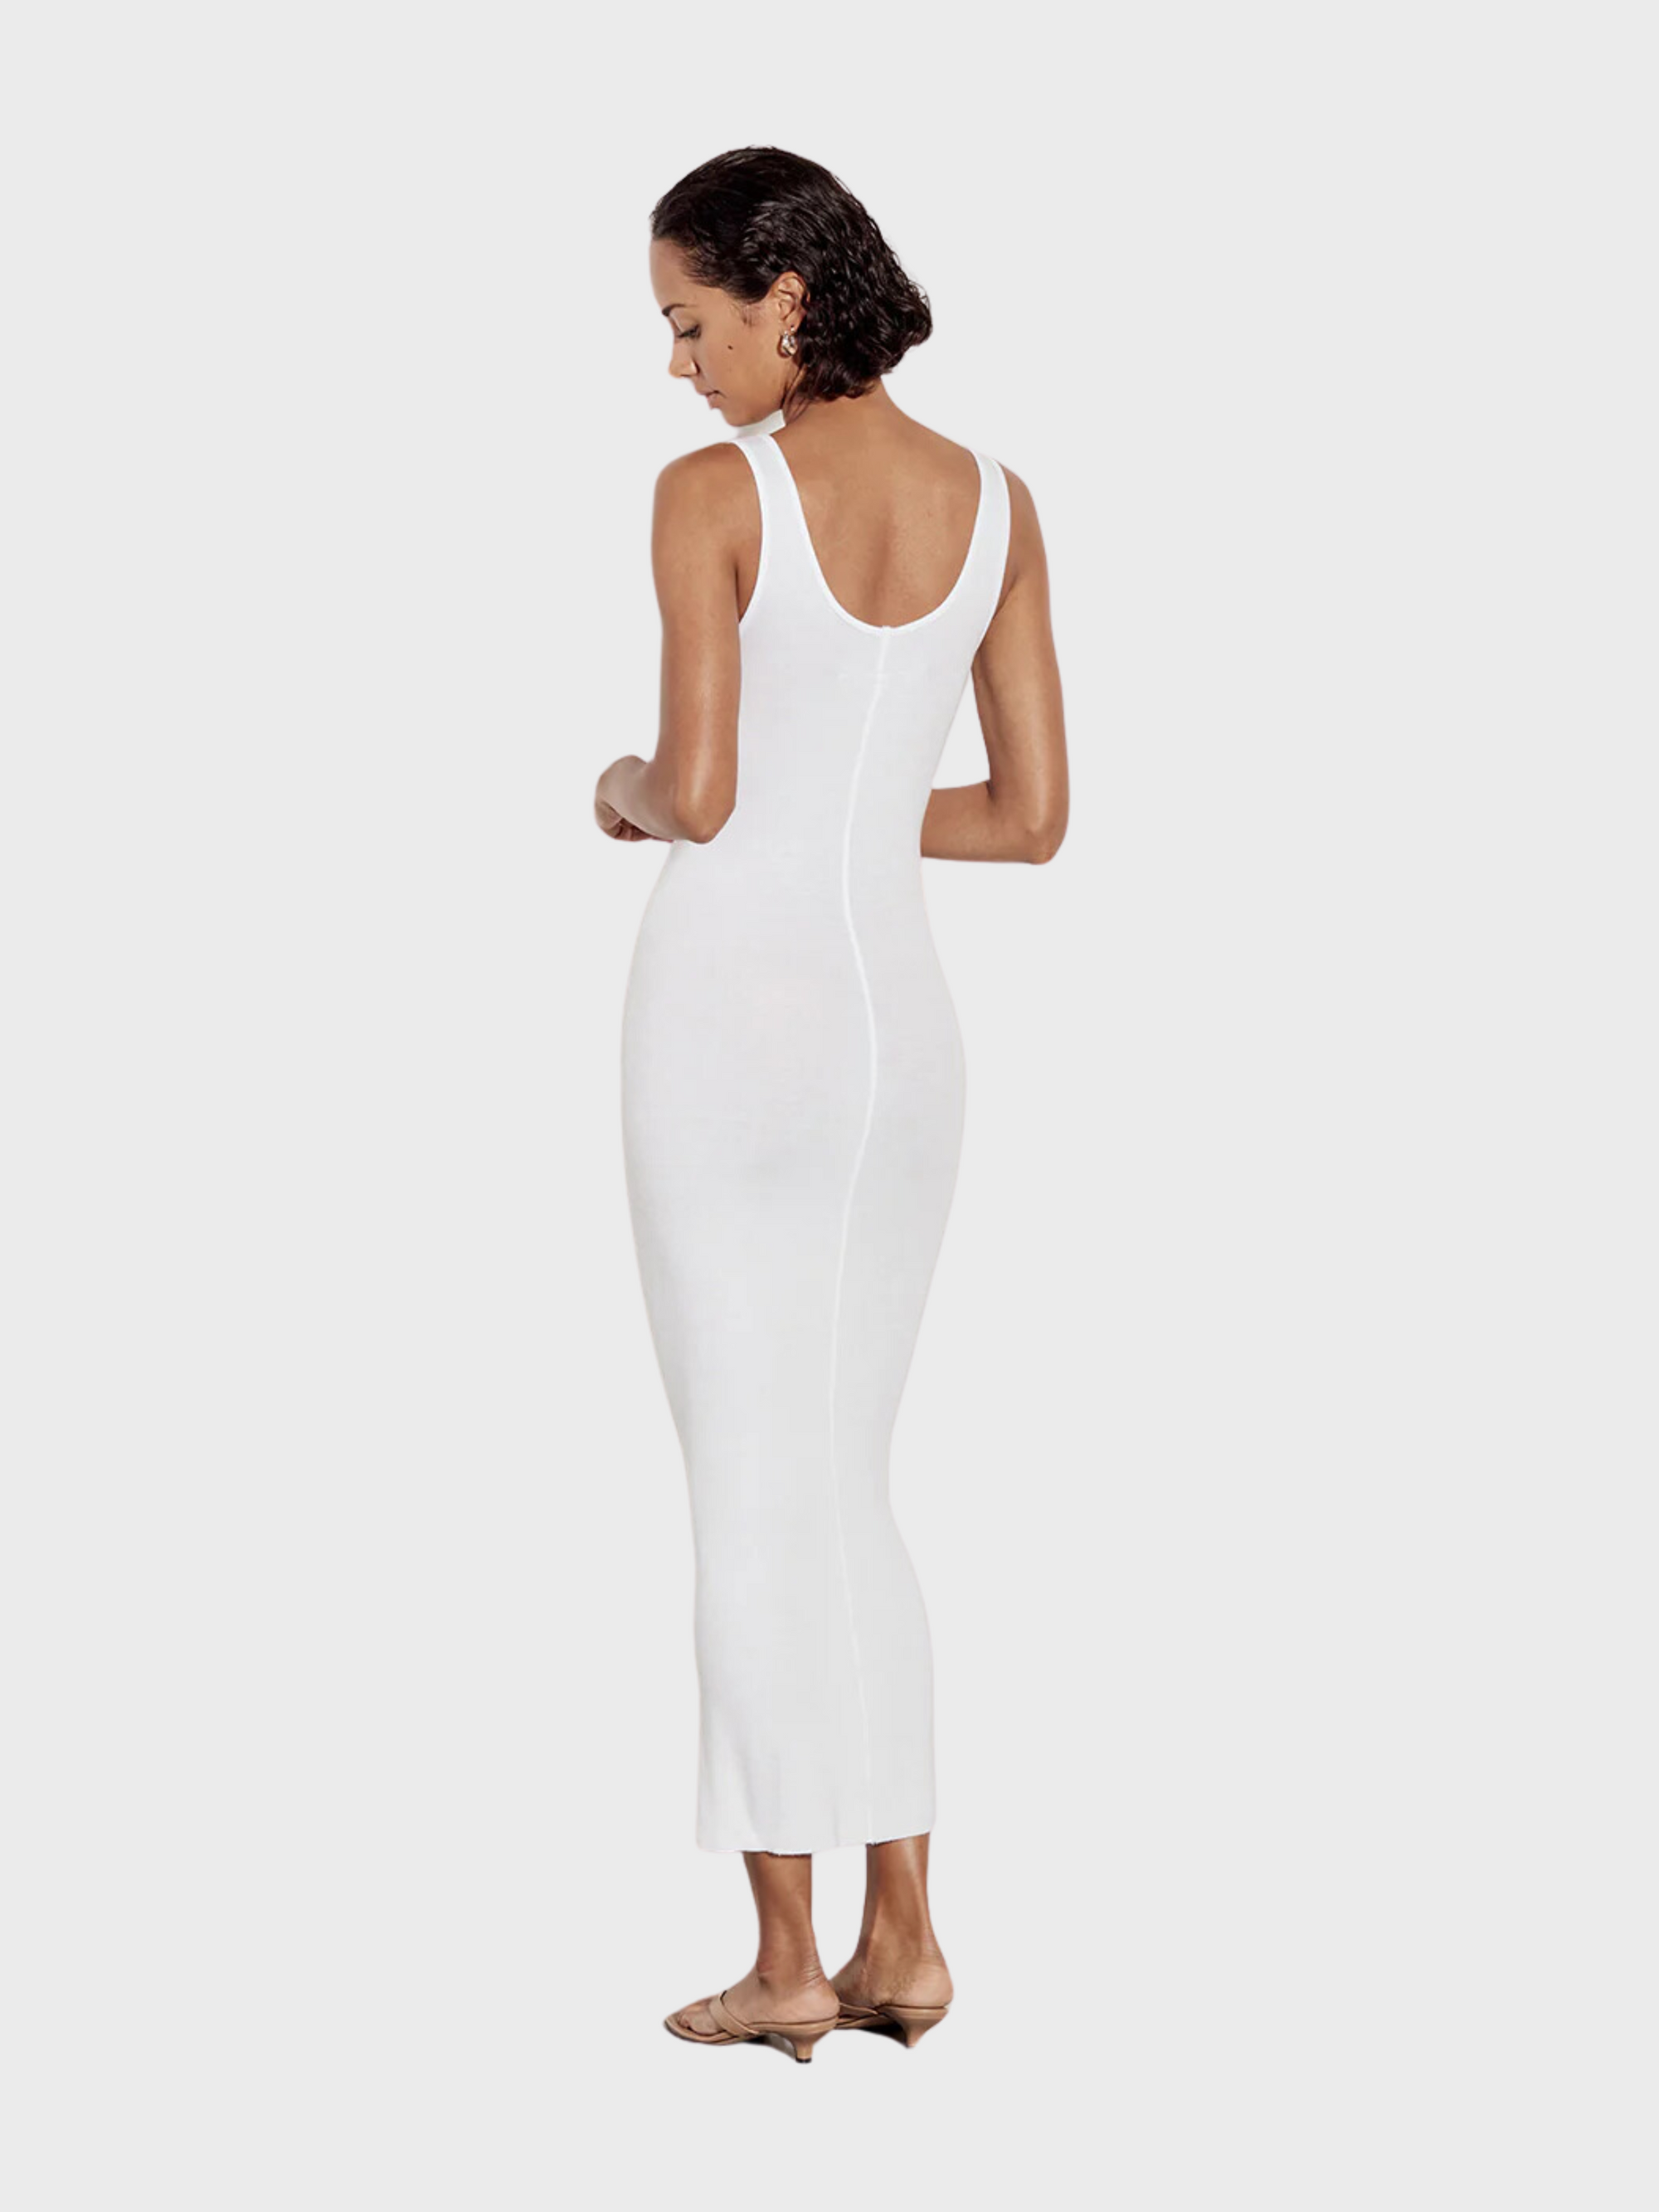 Enza Costa Stretch Silk Knit Maxi Tank Dress White-Dresses-West of Woodward Boutique-Vancouver-Canada